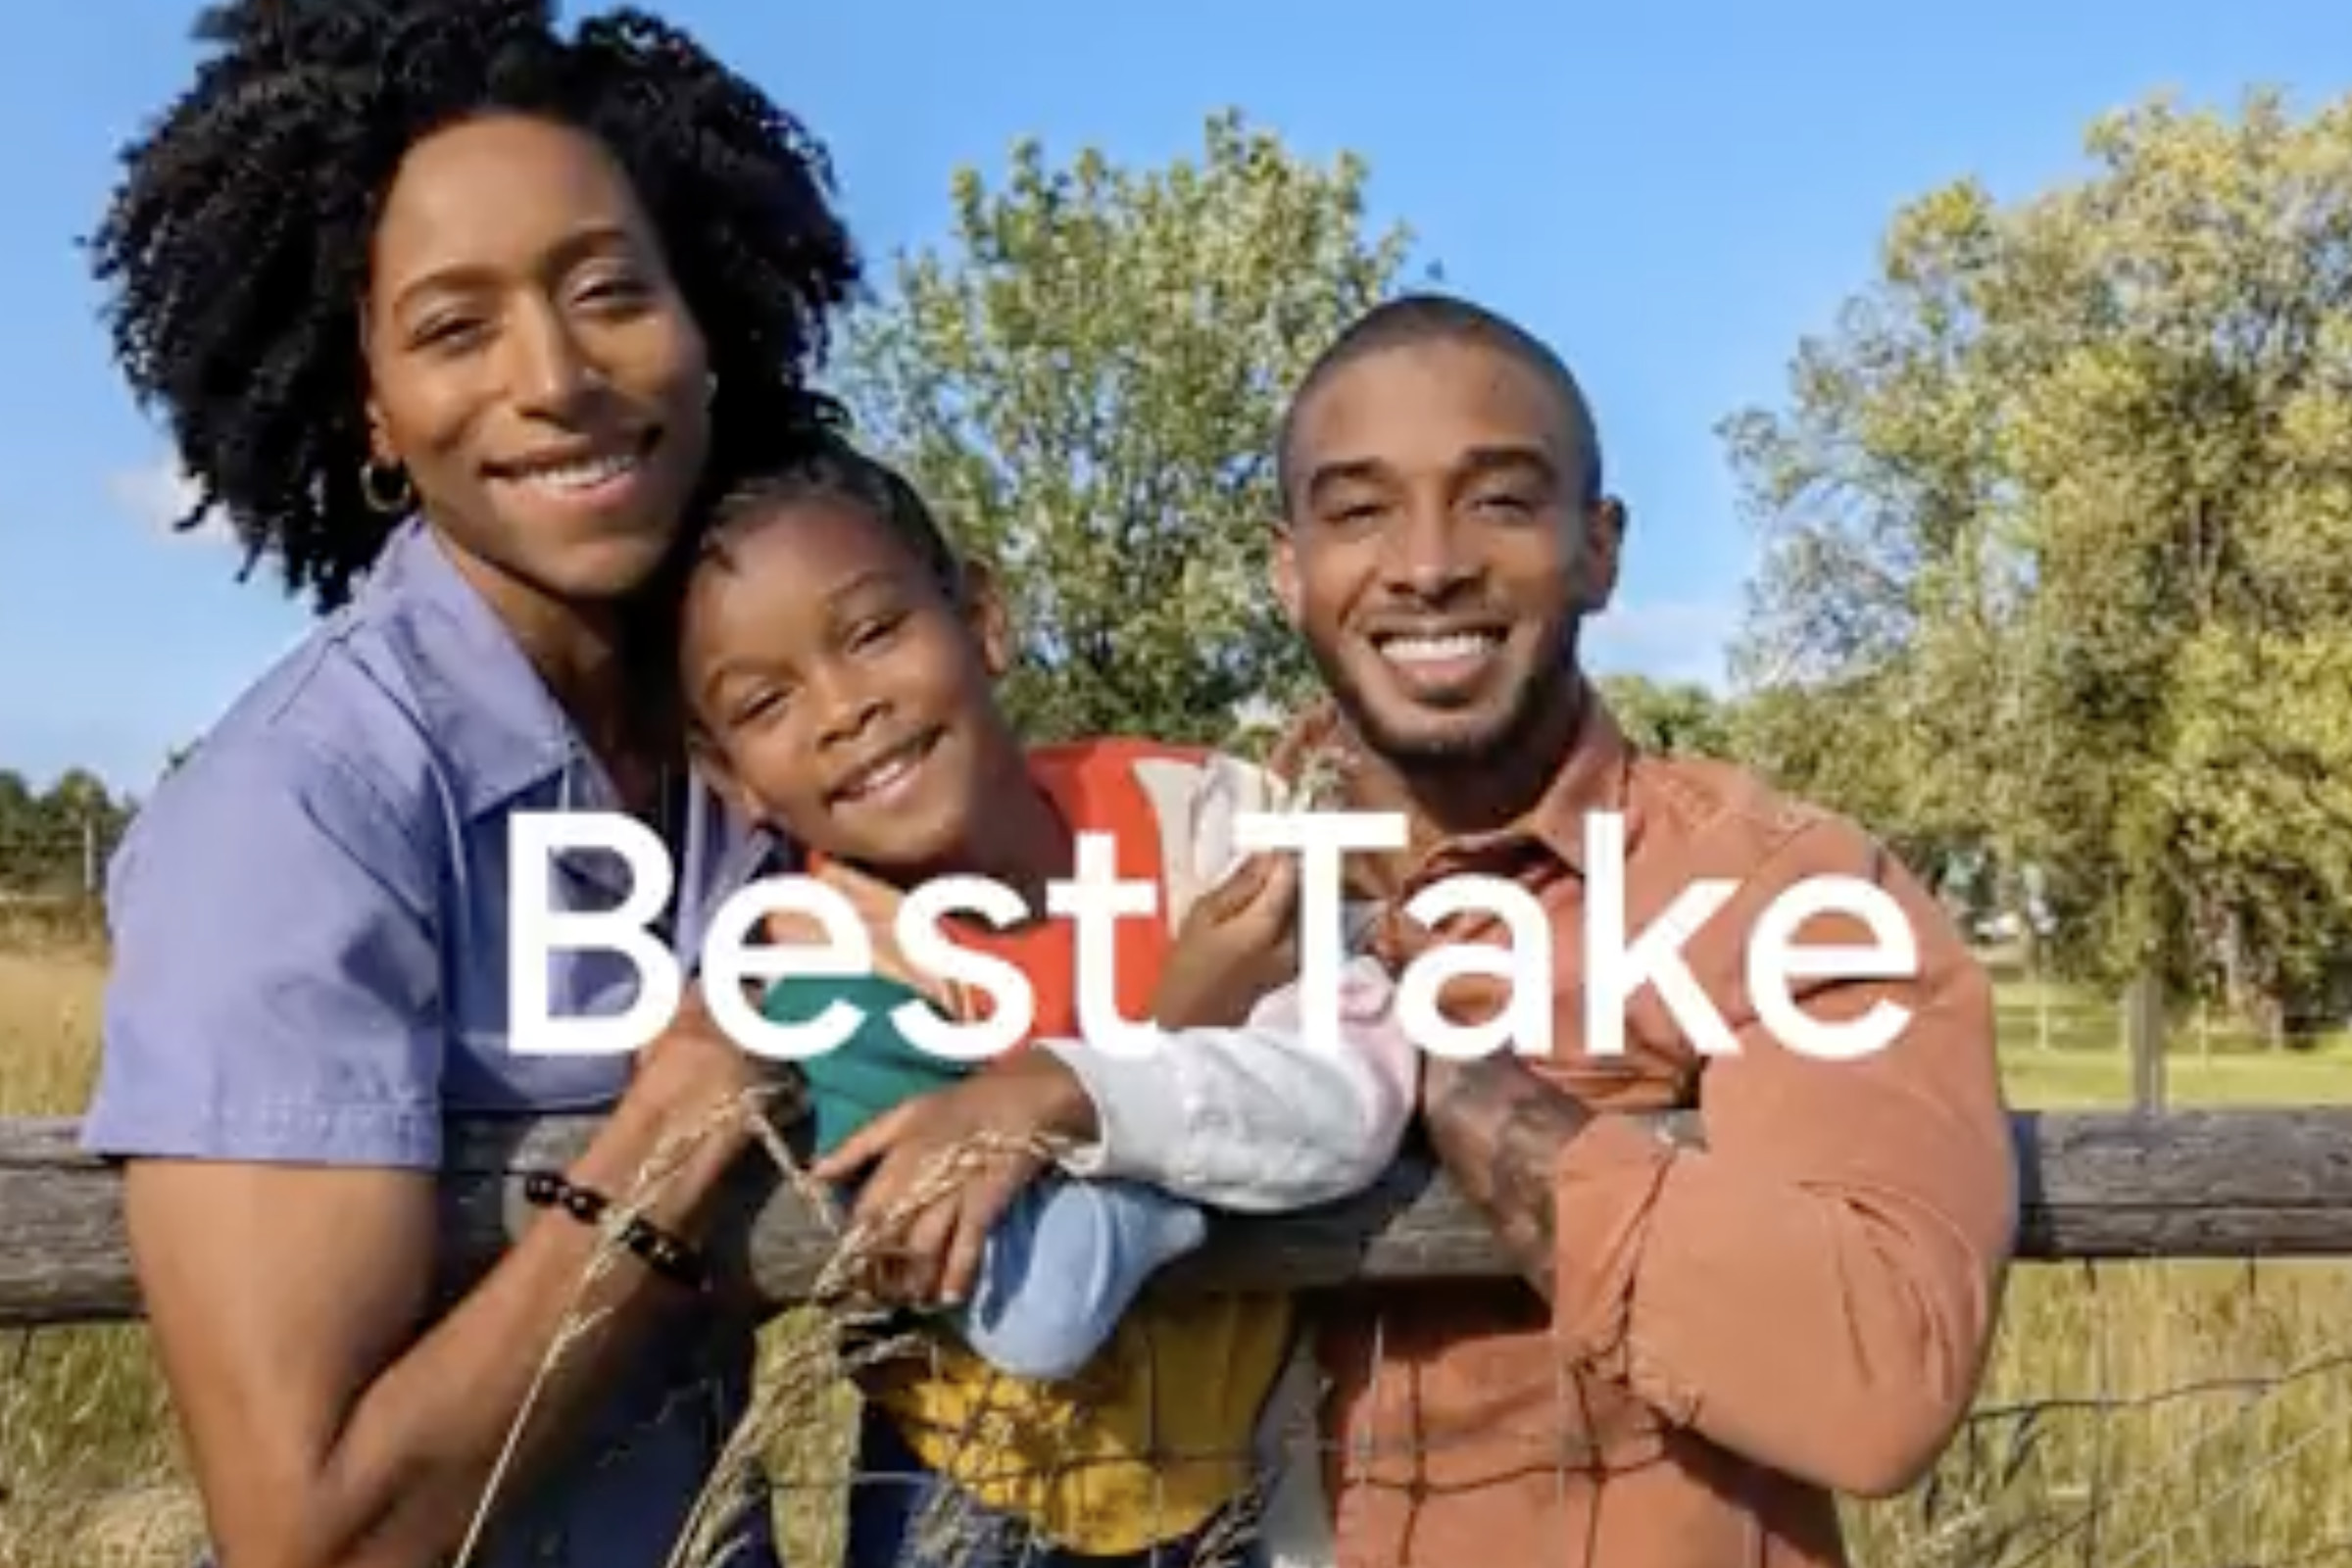 A screenshot of two adults holding a child, all smiling, with the words “Best Take” overlaid on the image.